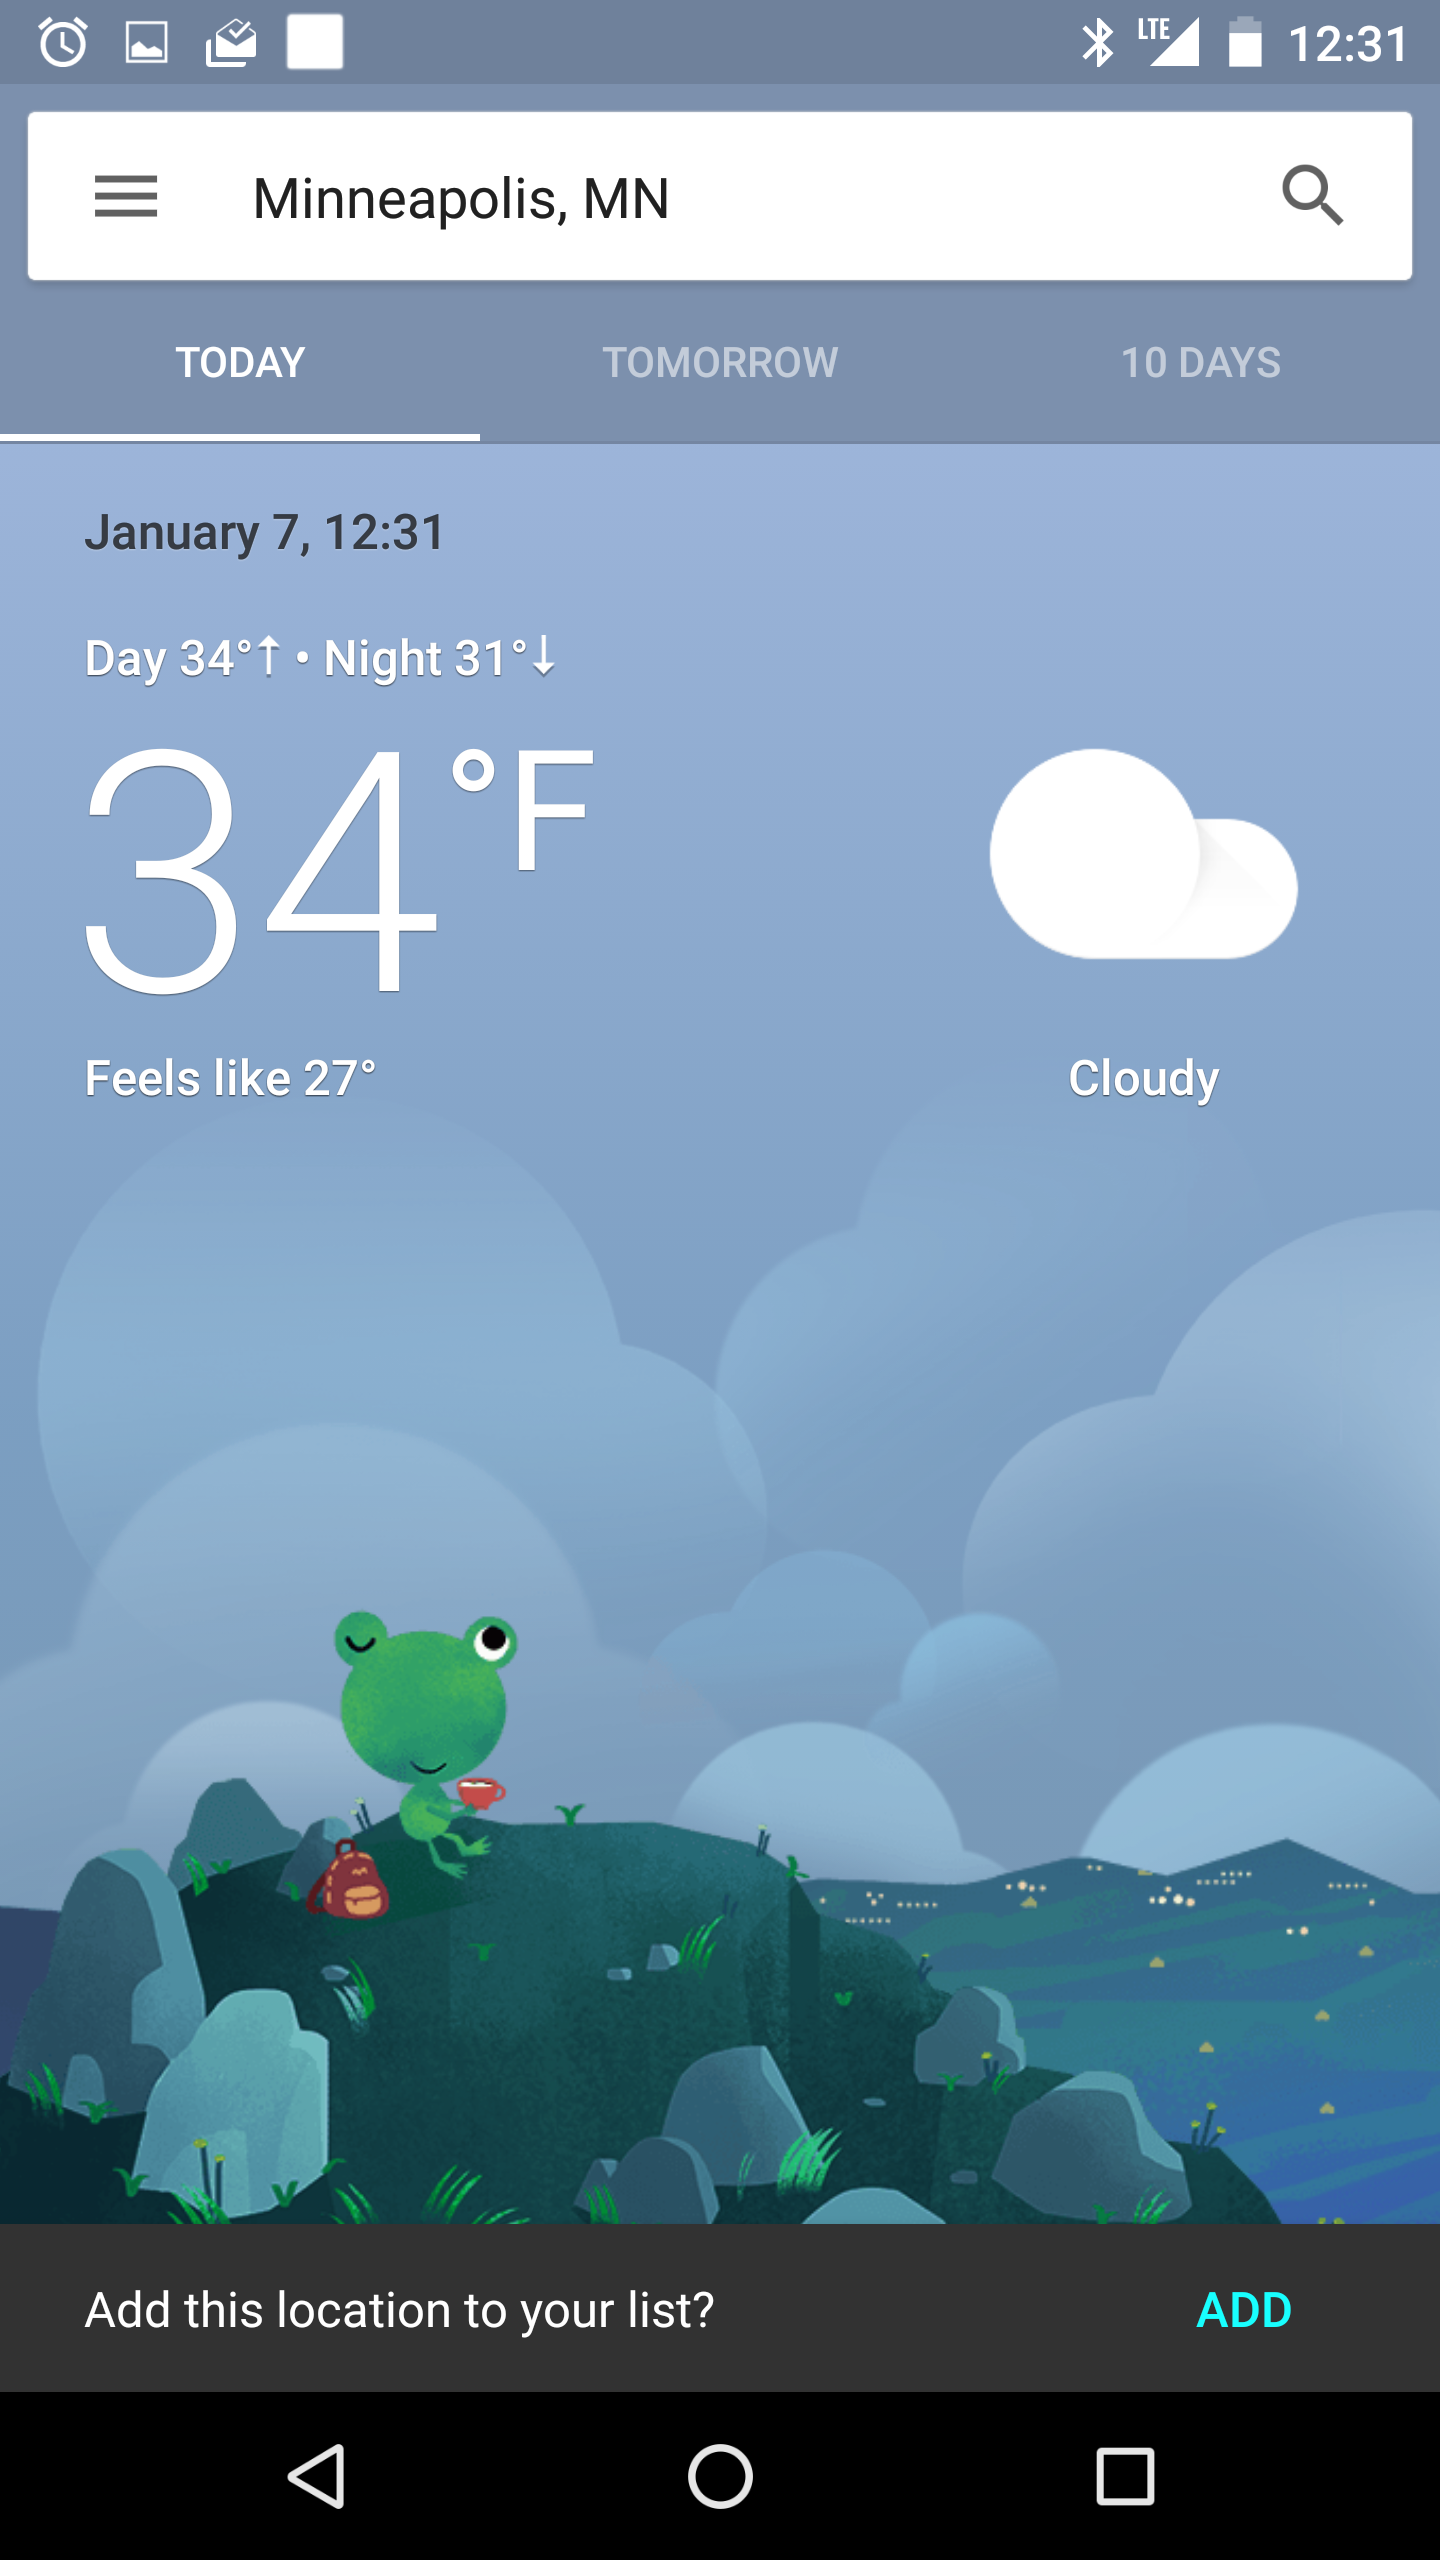 Google seems to be testing a beautiful new weather interface Phandroid